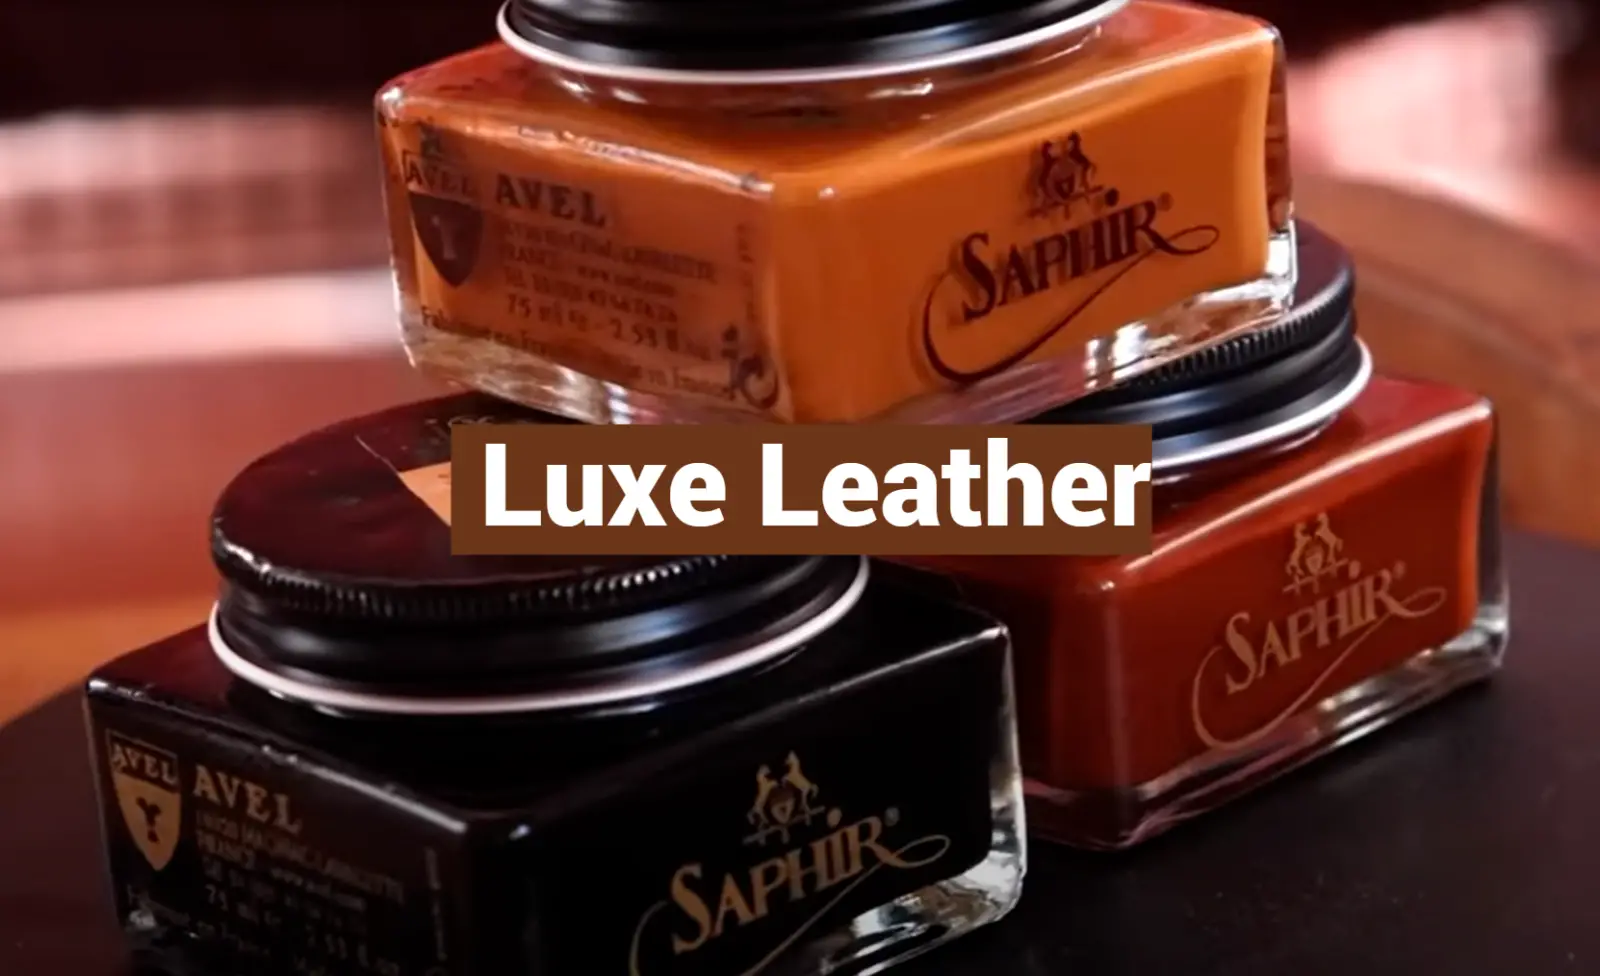 Luxe Leather: Definition, Uses, Care and Maintenance